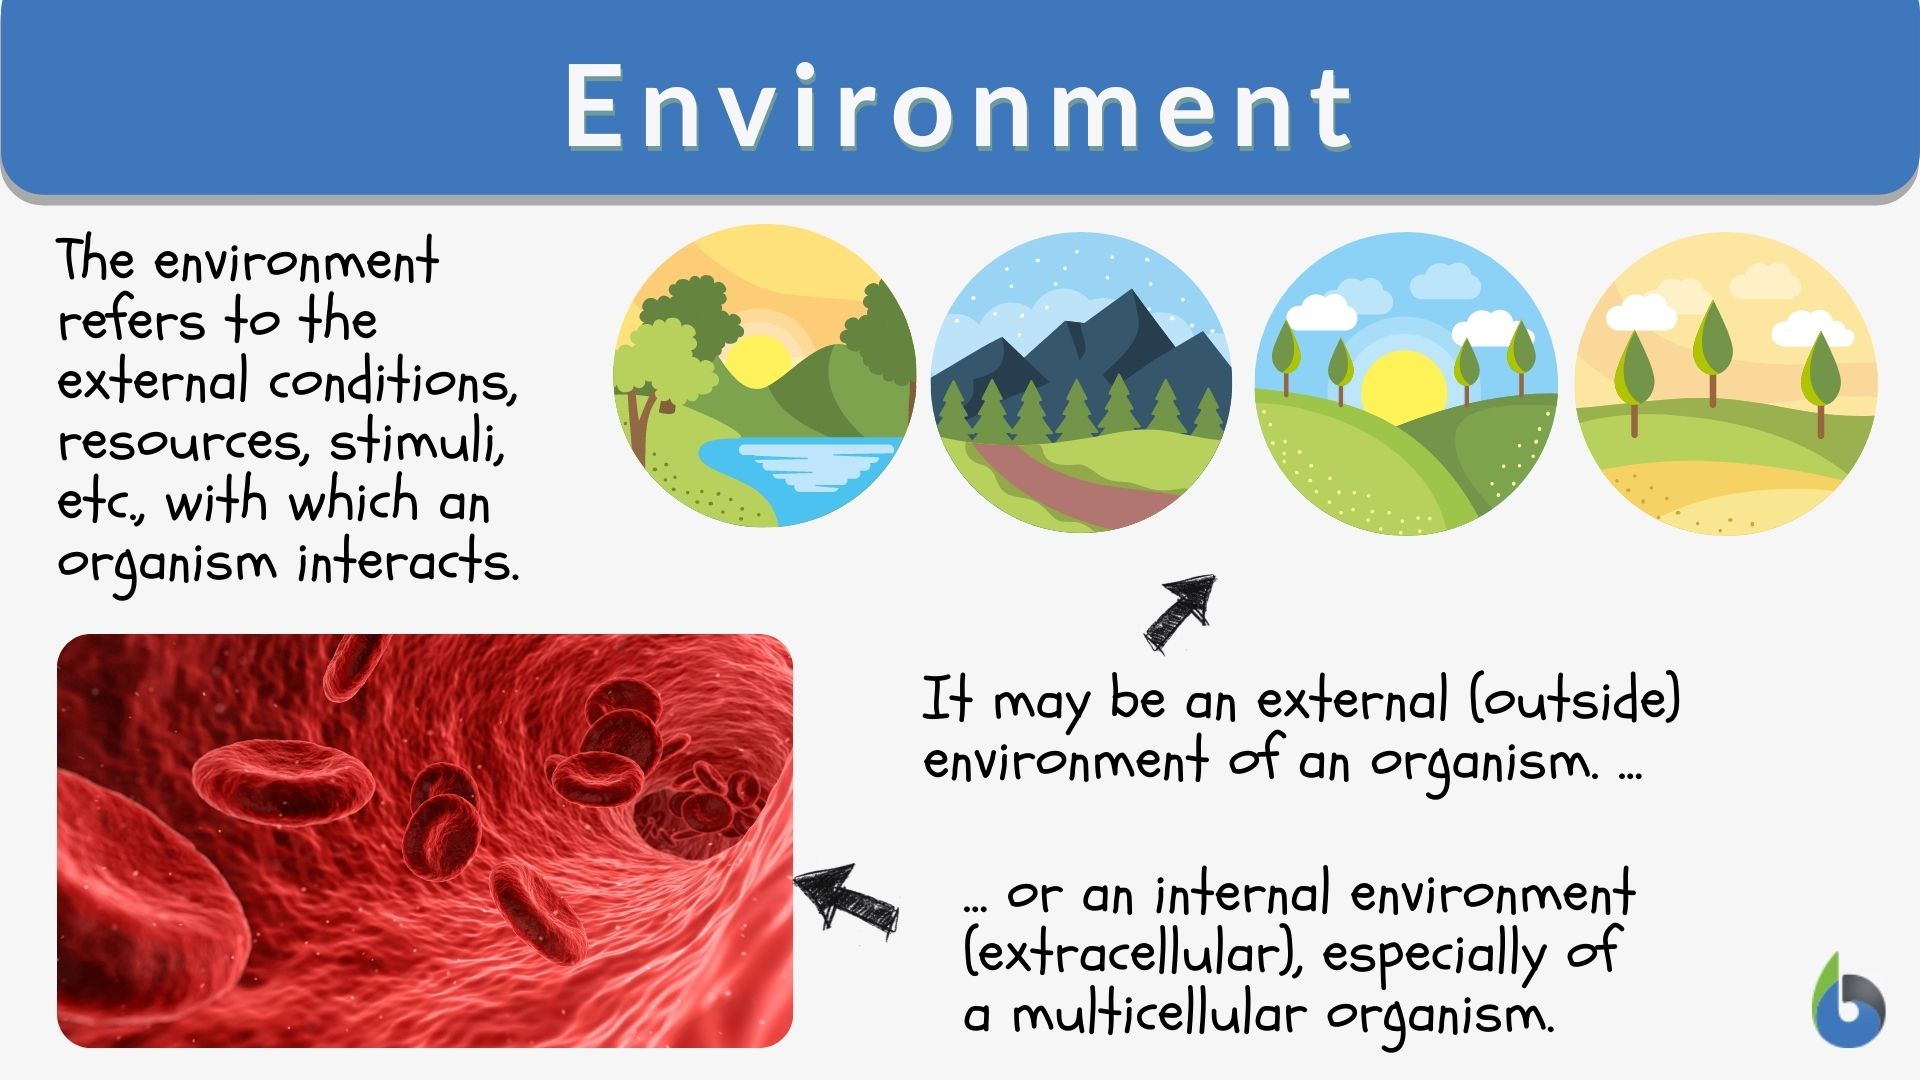 How many types of environment are there?